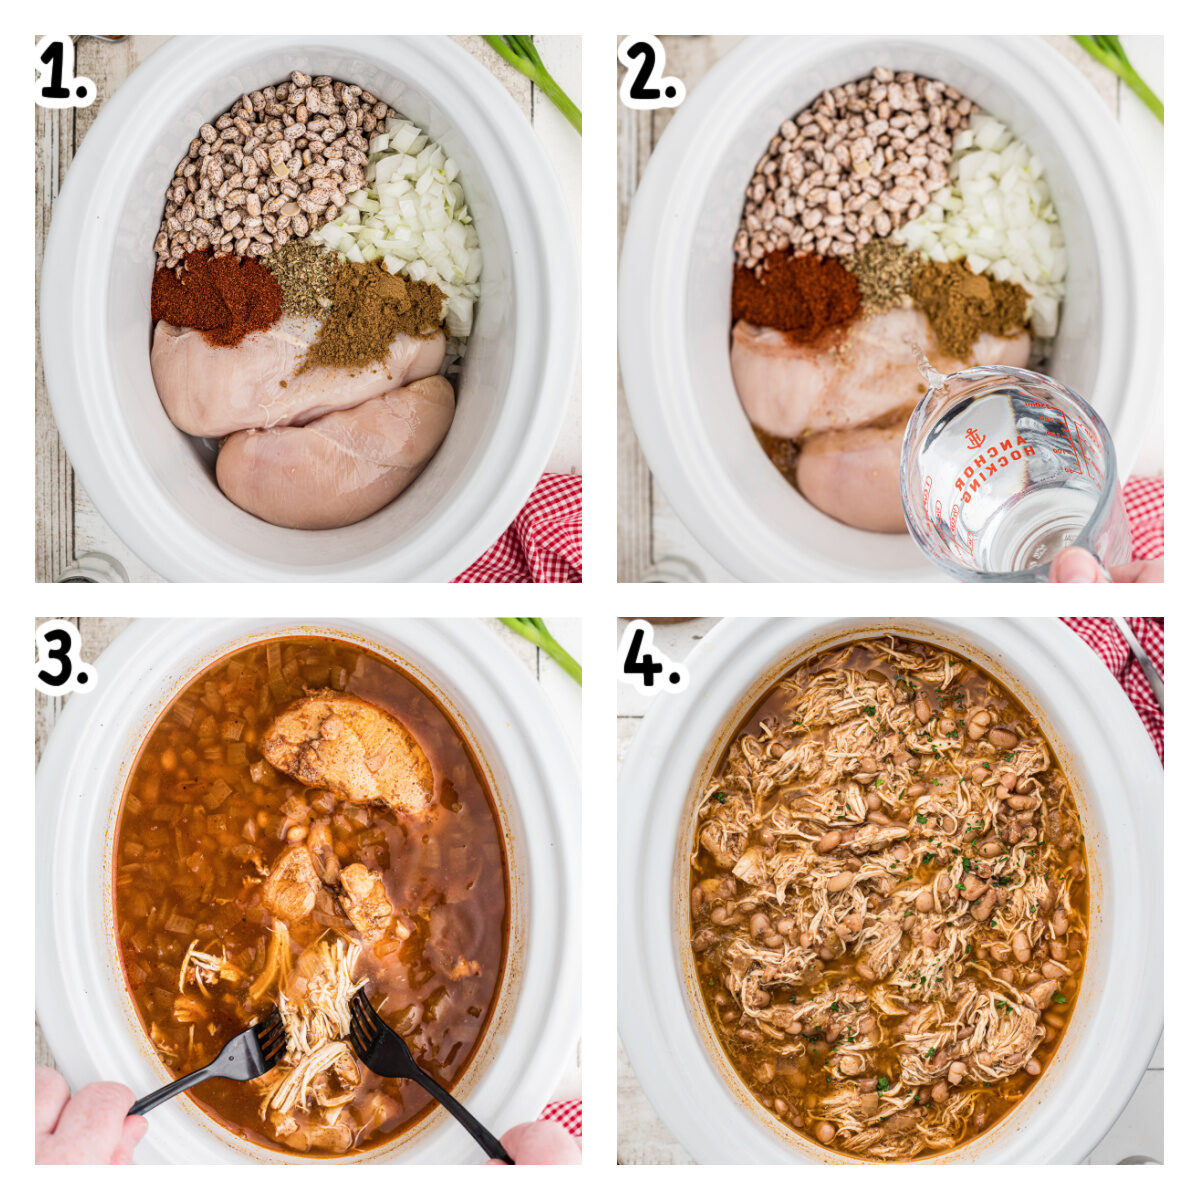 Four images showing how to make pinto beans and chicken.